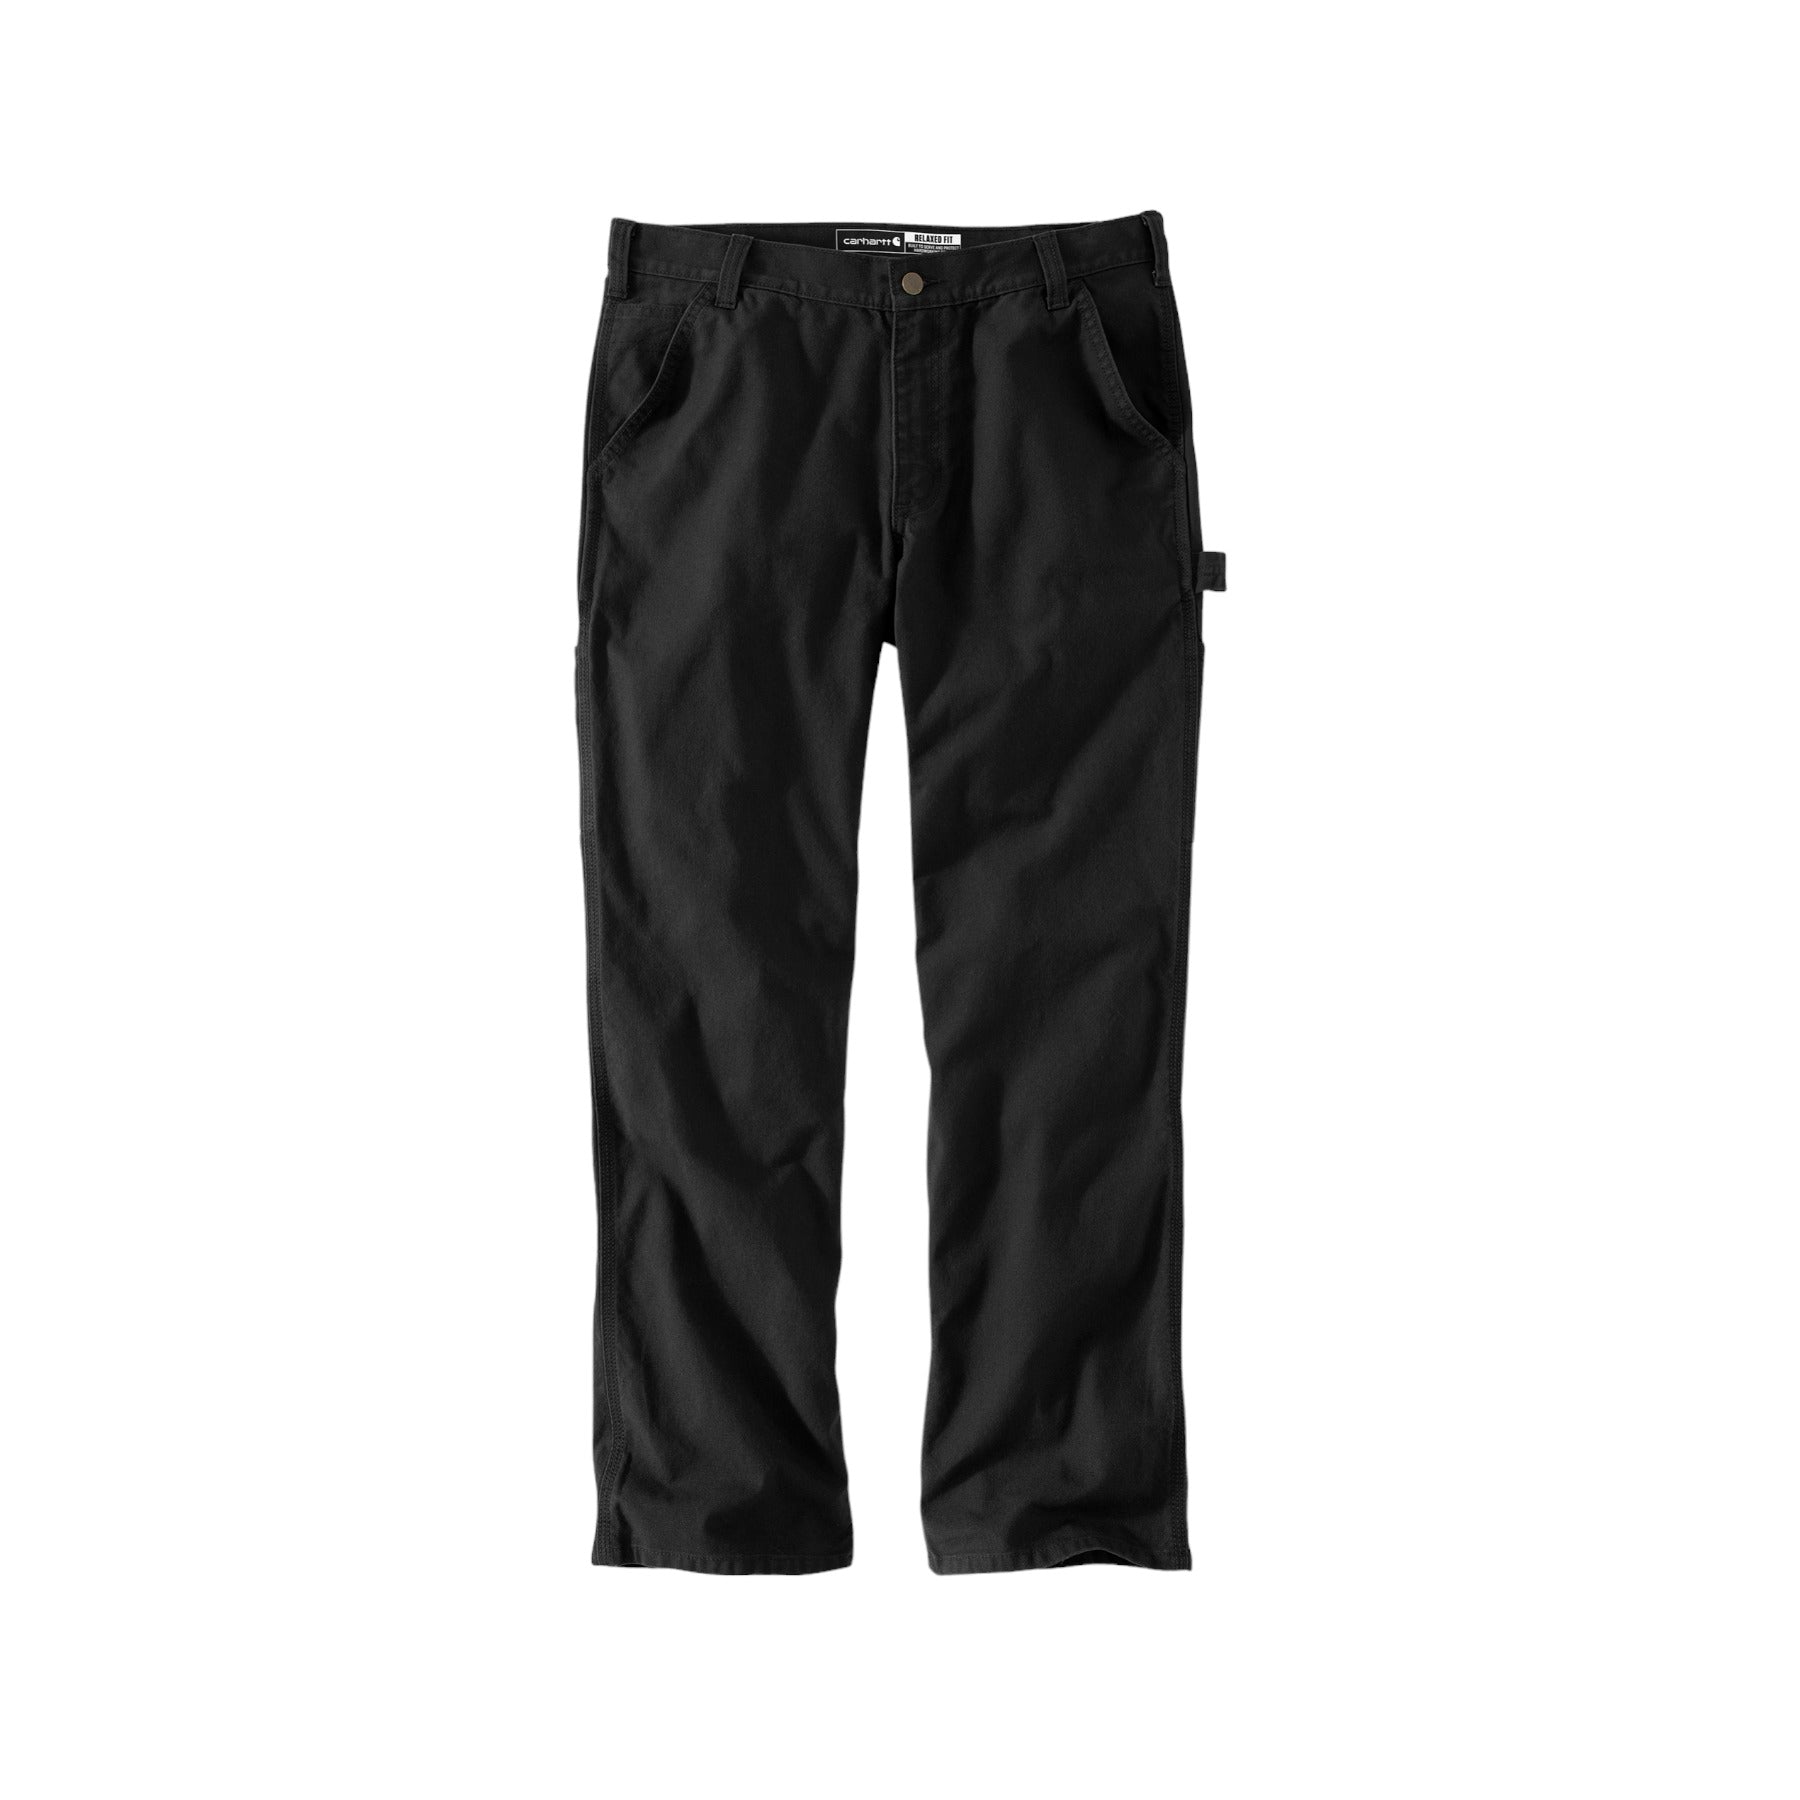 Carhartt Flex Relaxed Fit Duck Utility Pant - Black